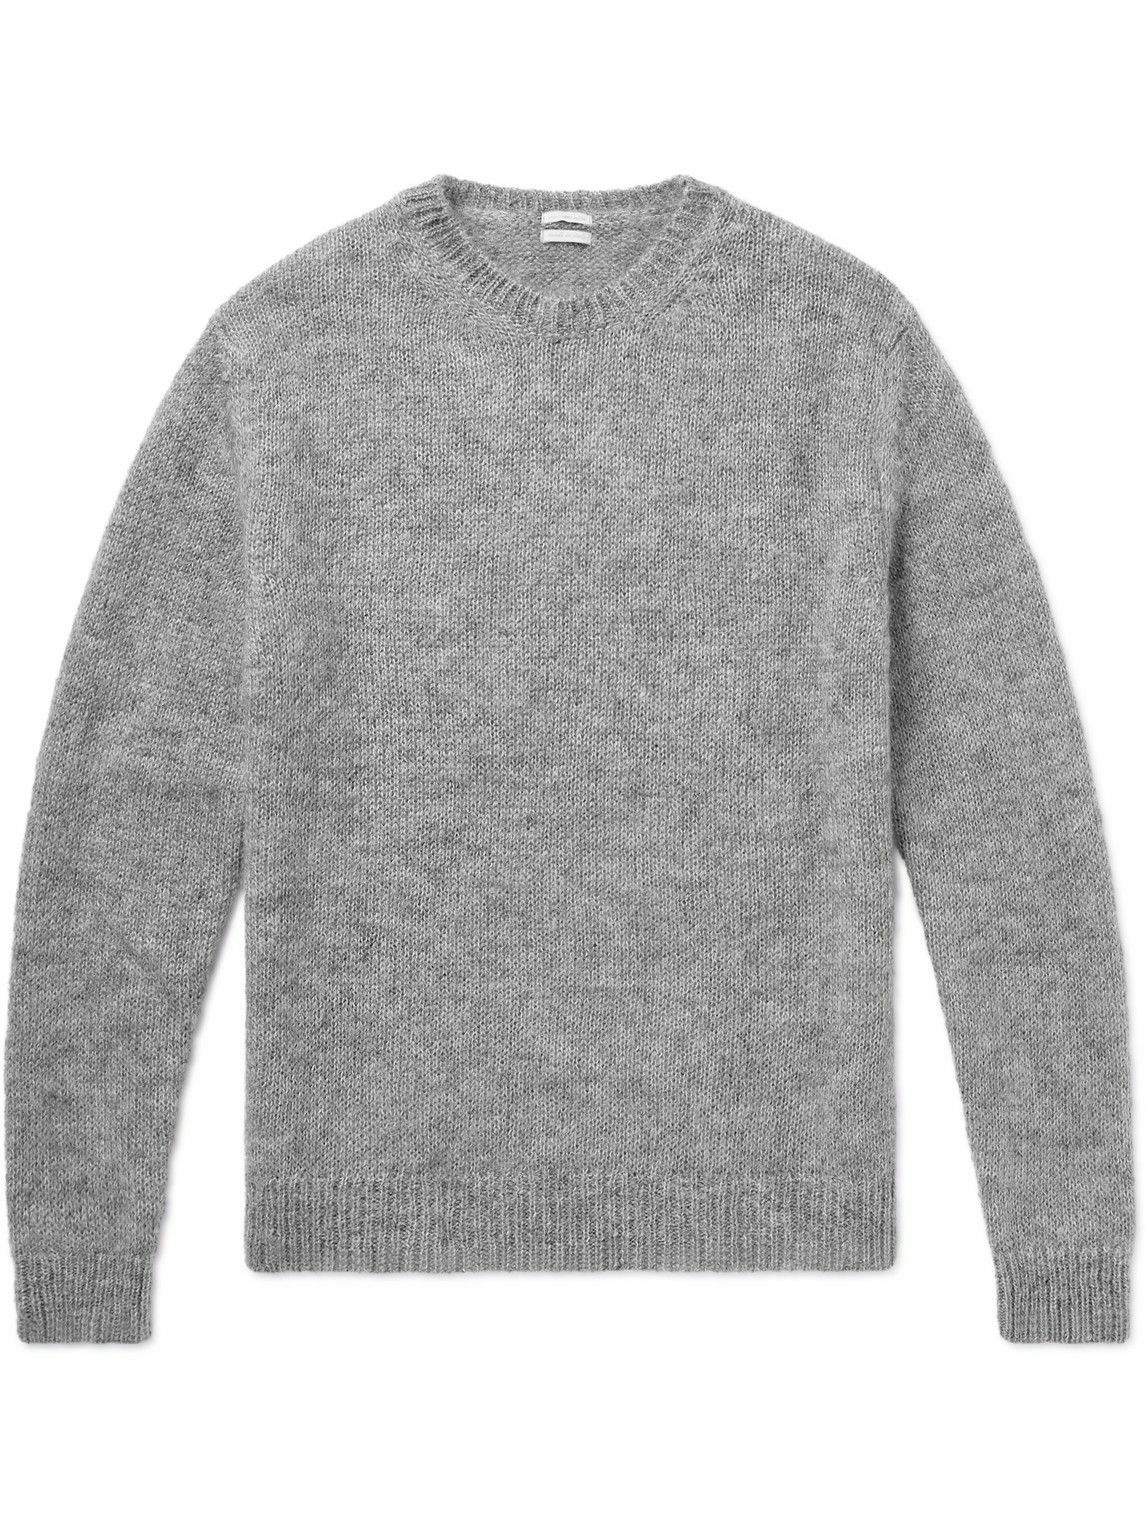 Massimo Alba - Alder Brushed Mohair and Silk-Blend Sweater - Gray ...